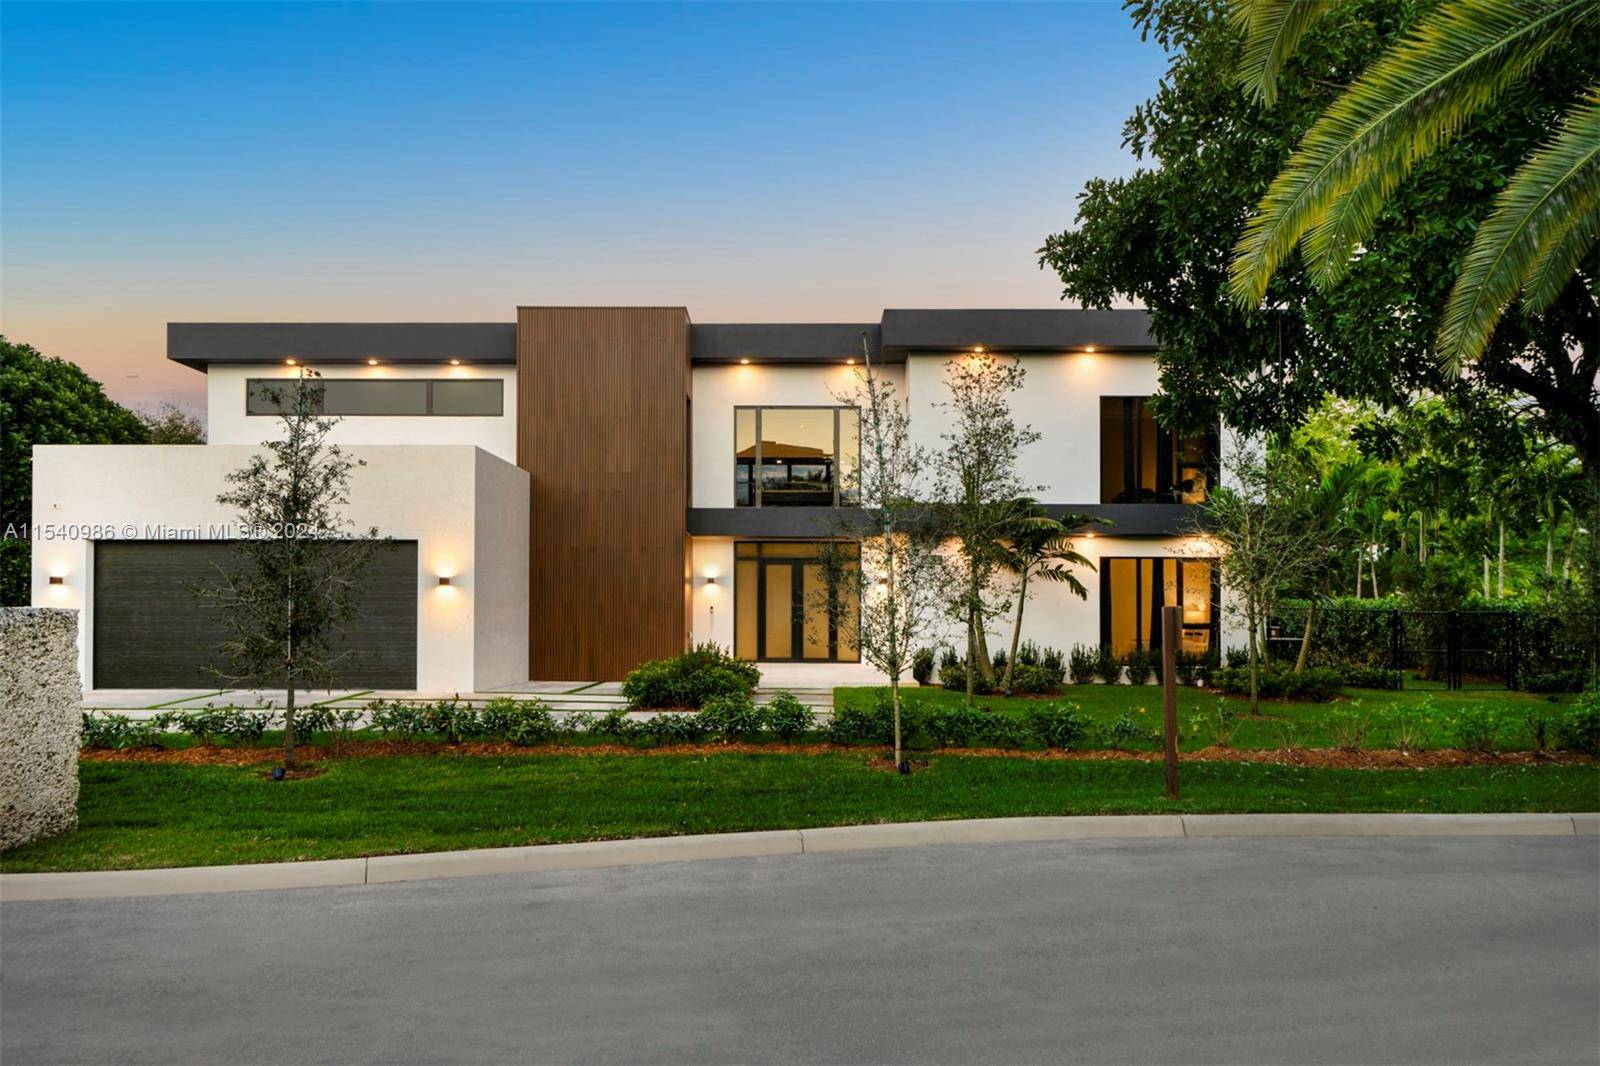 In a tranquil cul de sac, this new contemporary corner home offers an airy, open layout with high ceilings and natural light located in North Pinecrest.